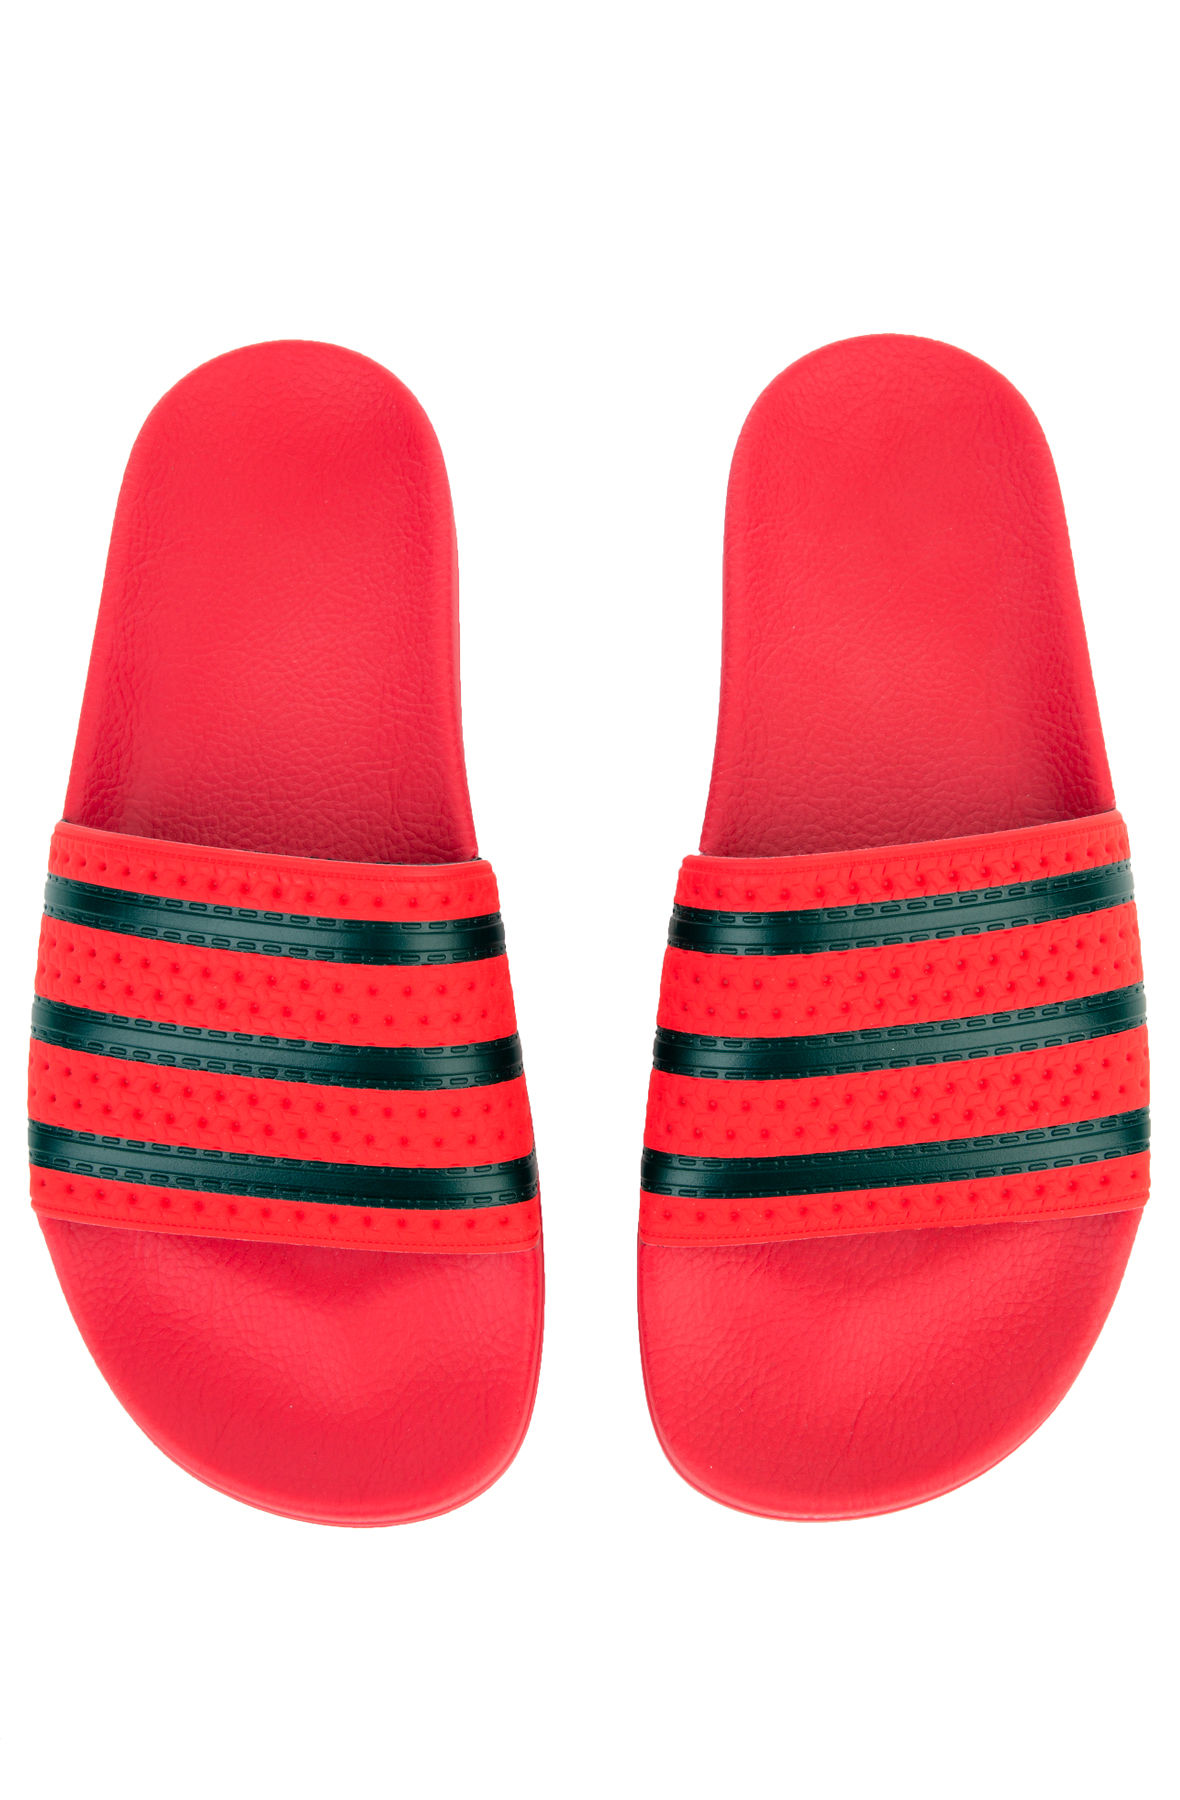 adidas slides black and red